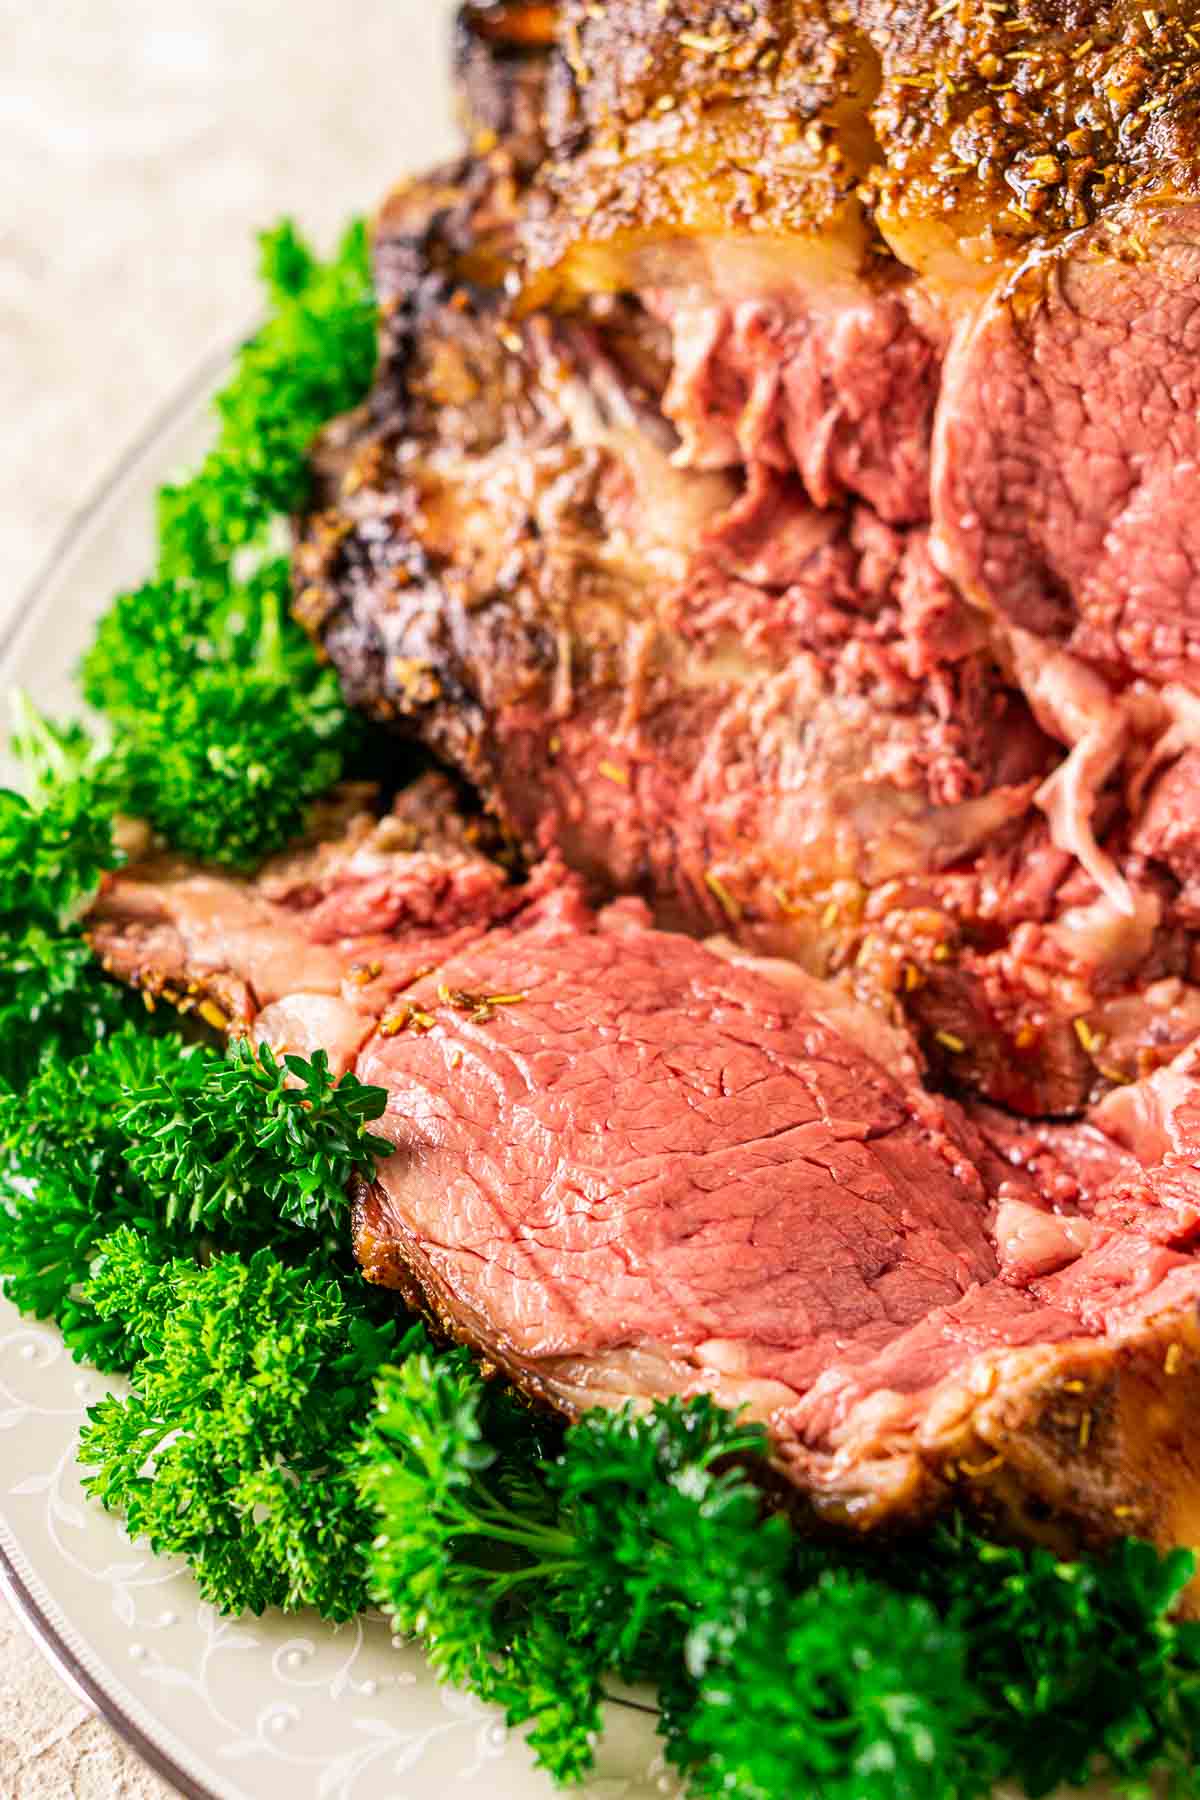 A close-up shot of a slice of the smoked prime rib on a platter with green parsley underneath as a garnish.